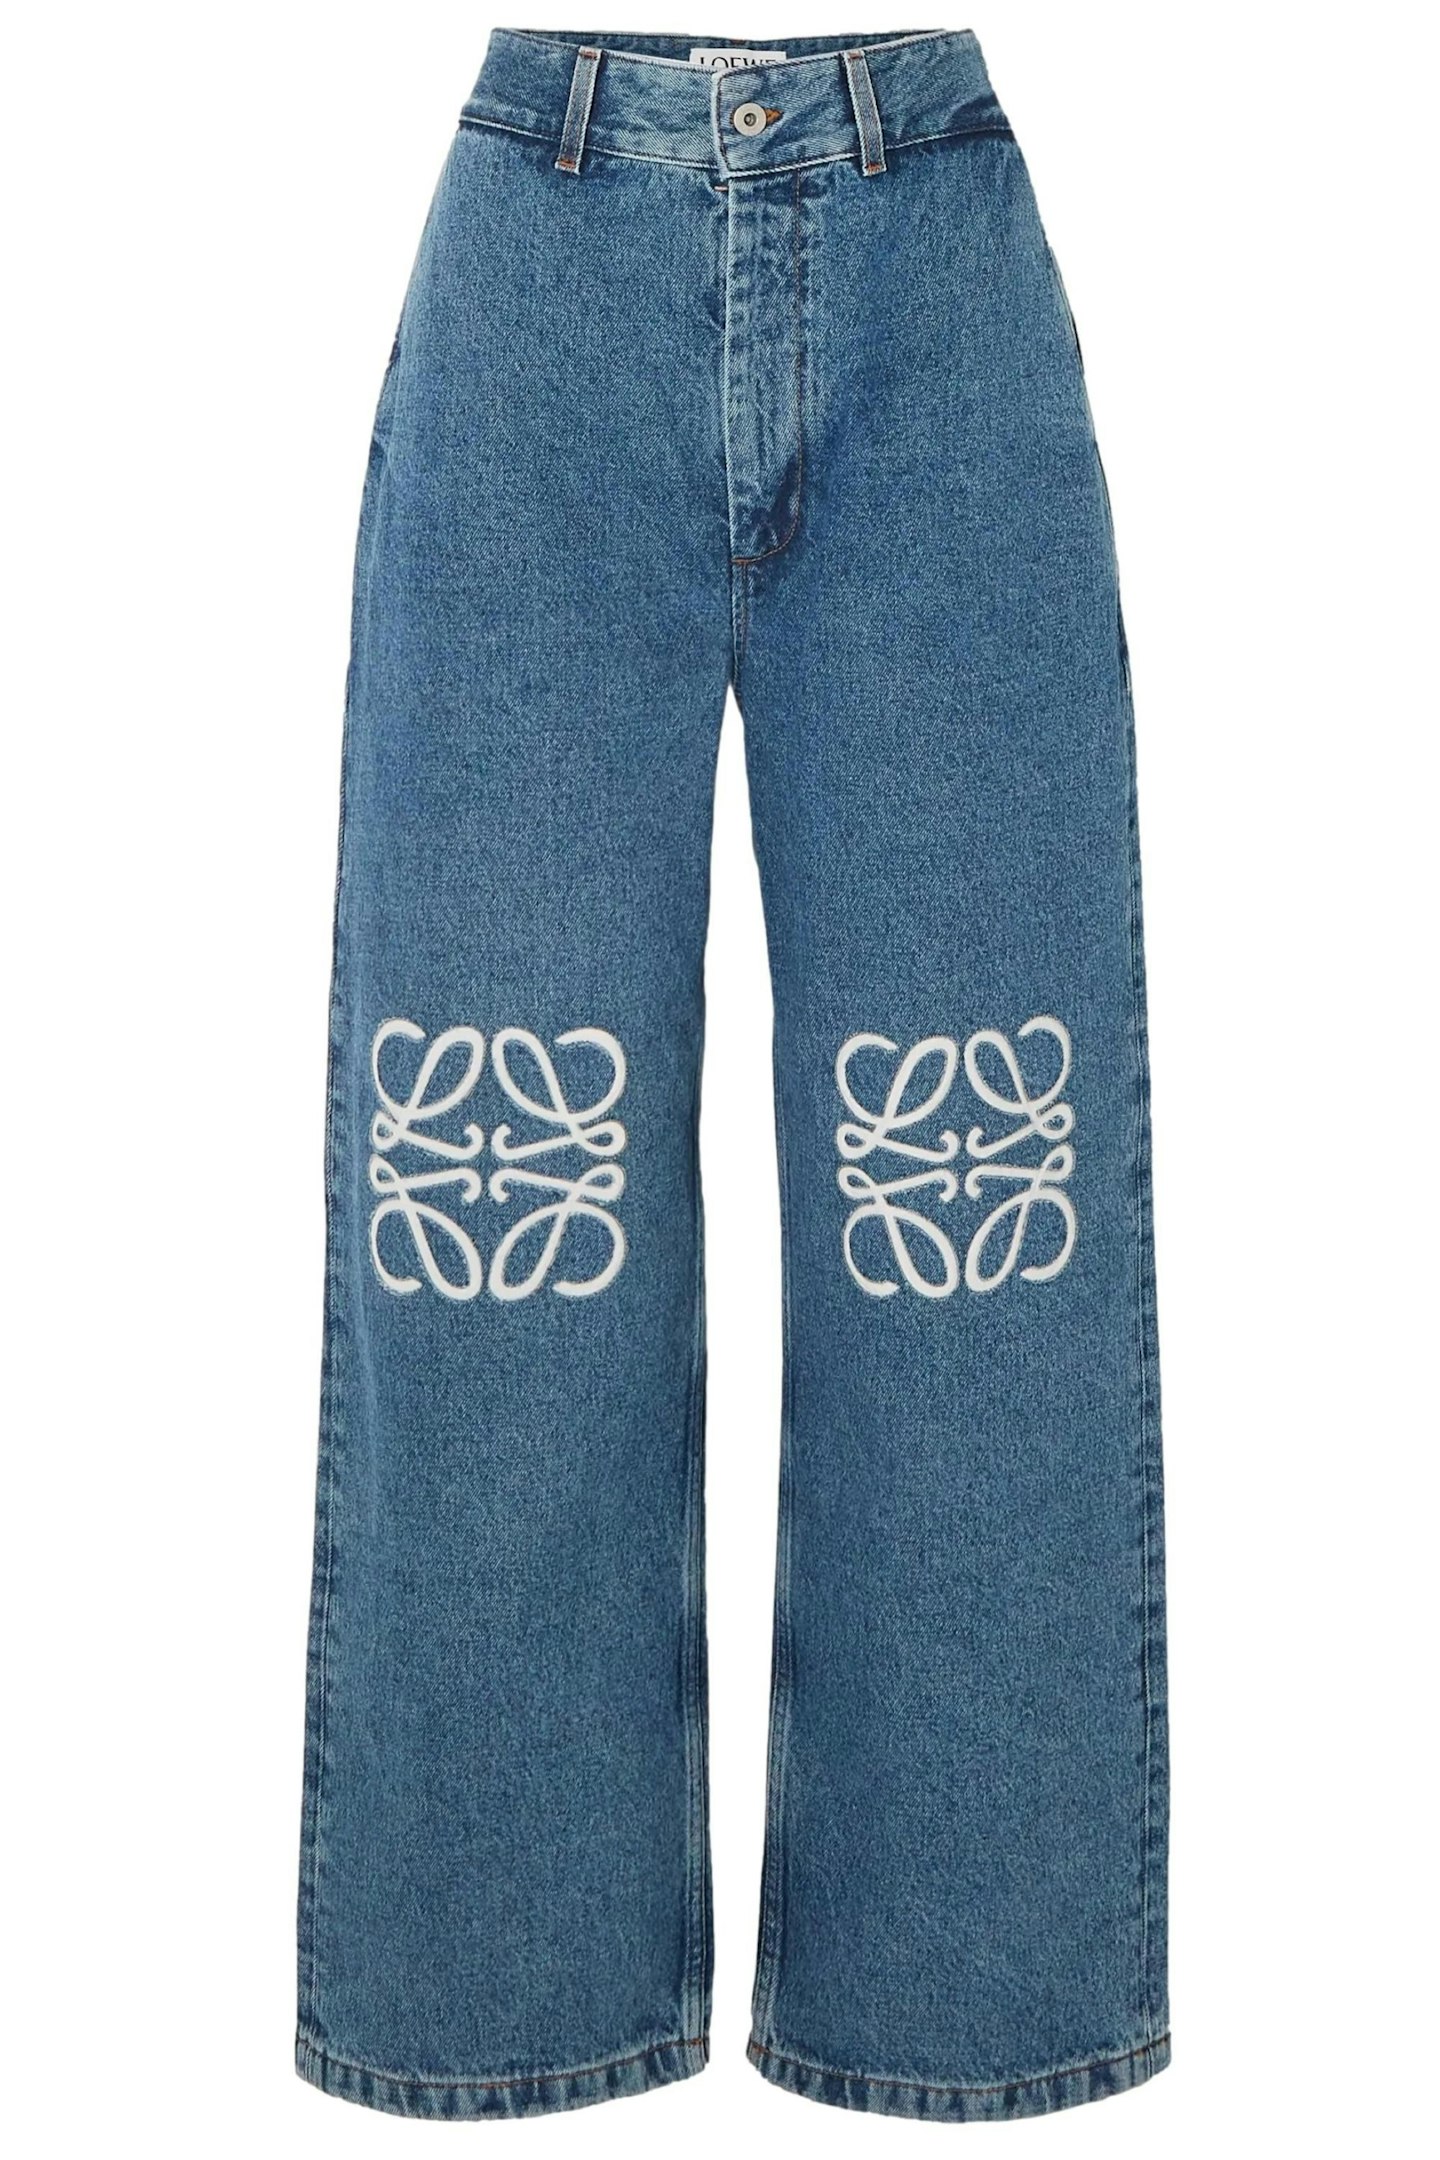 Everyone Is Wearing Printed Jeans Right Now | Fashion | Grazia